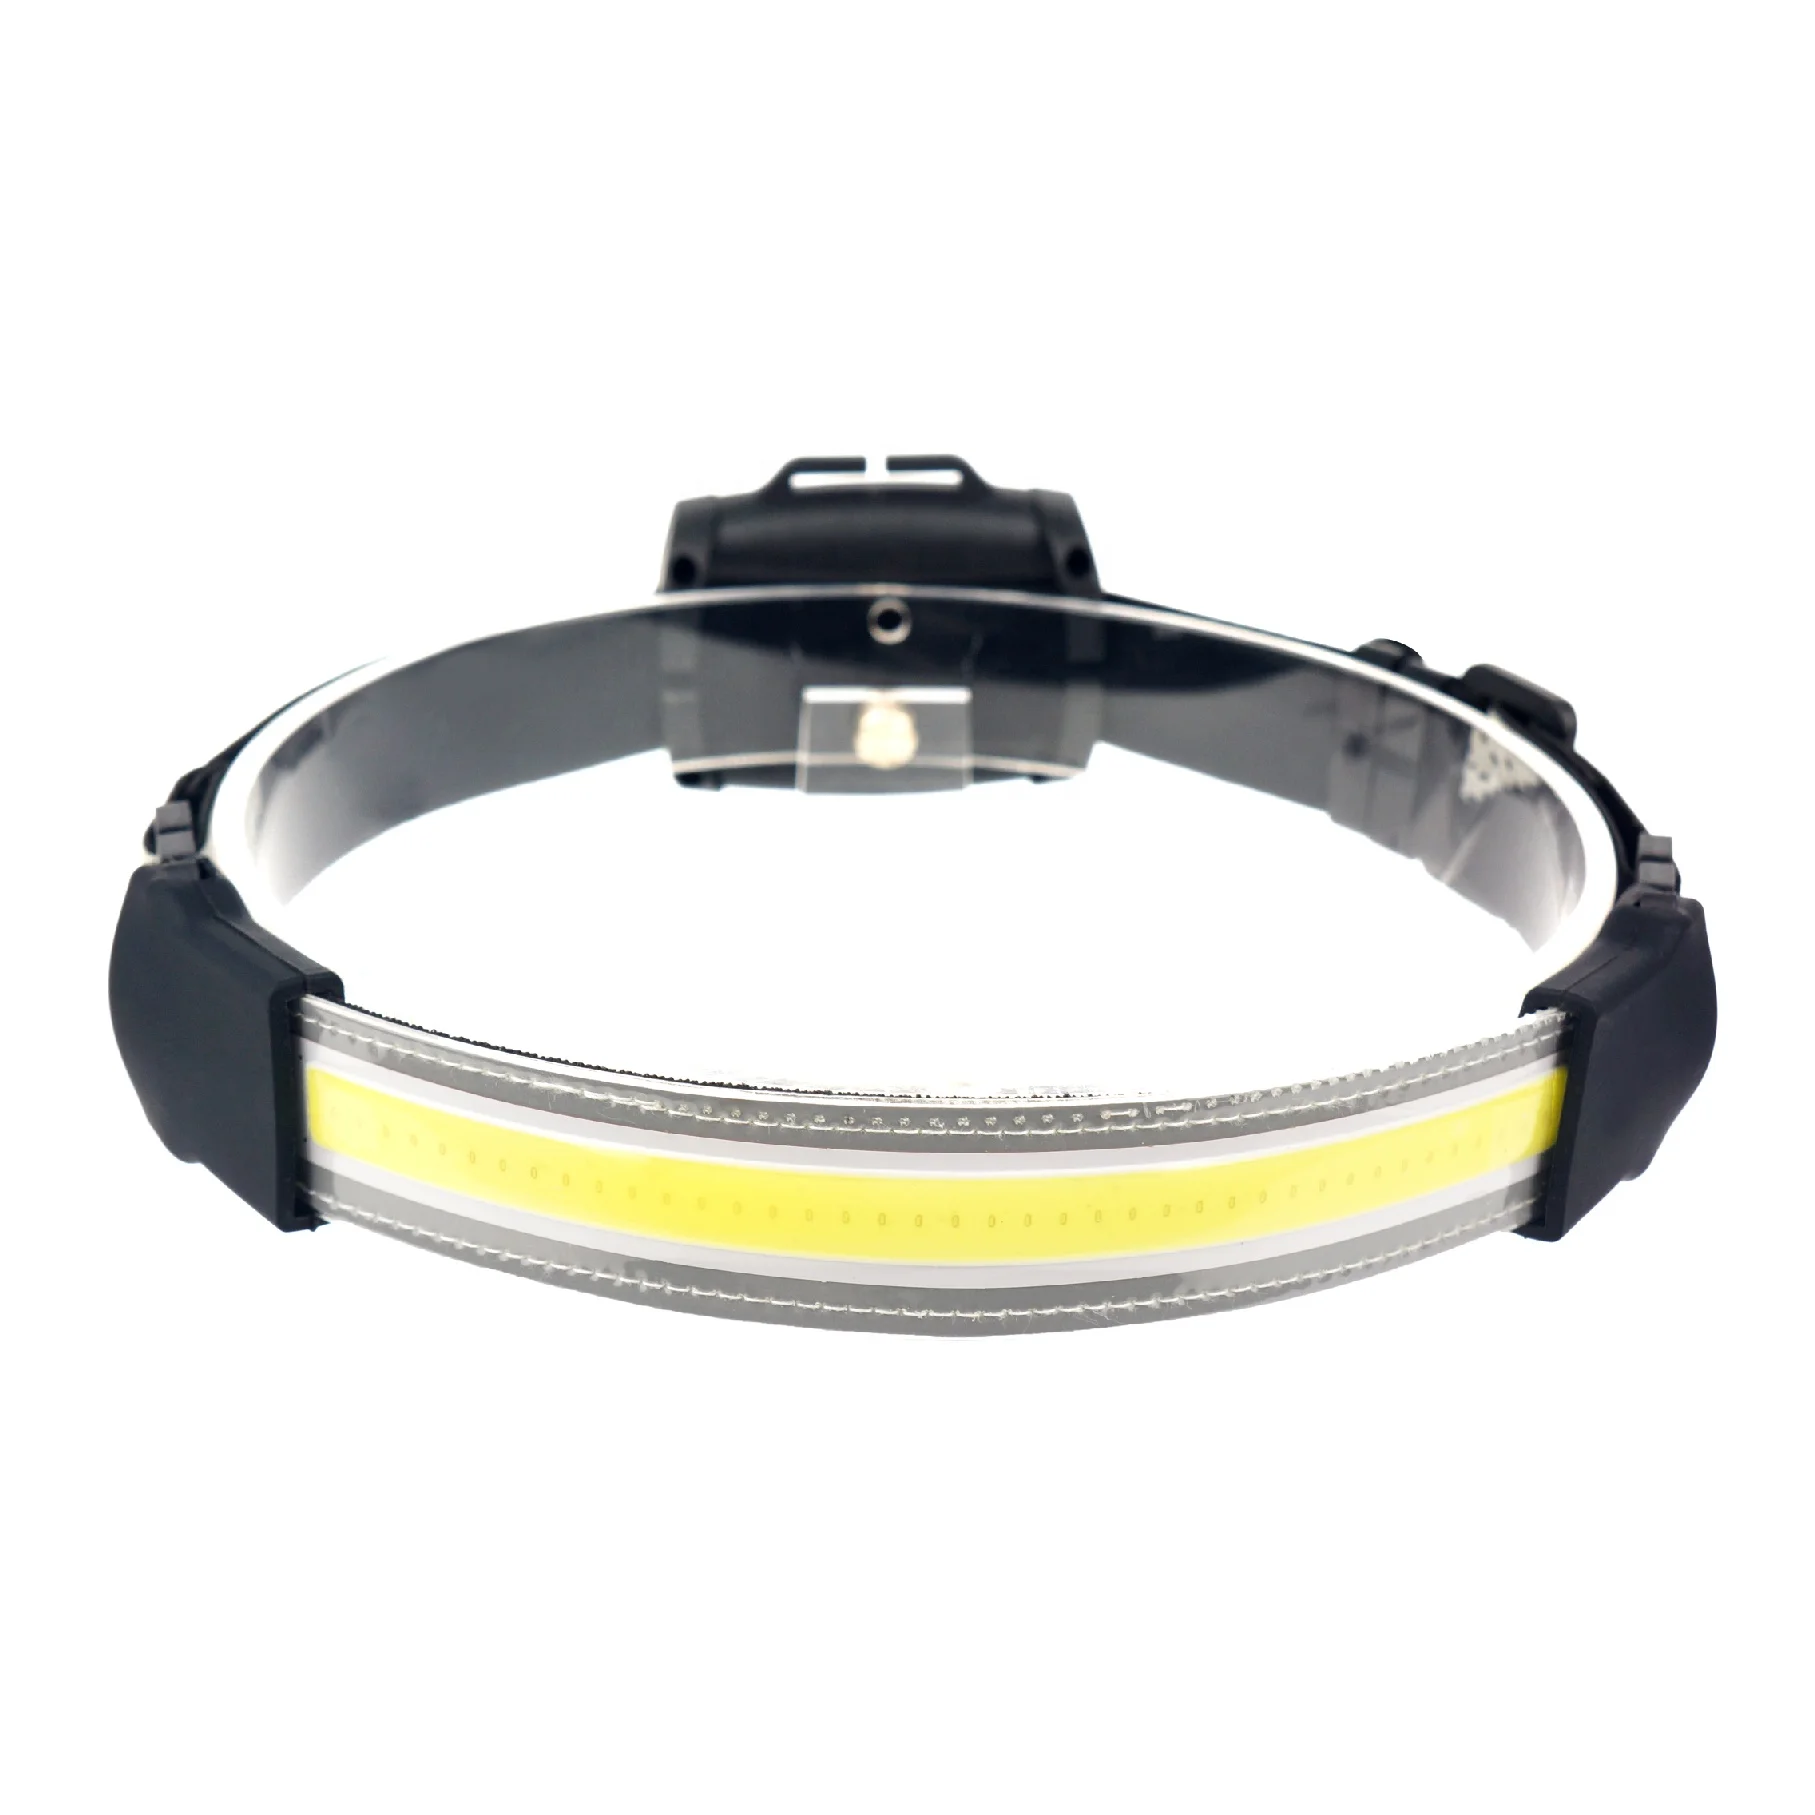 High Quality New Product Headlamp Mine Hunting Camping Rechargeable Flashlight Led Light Head Lamp (1600294909051)